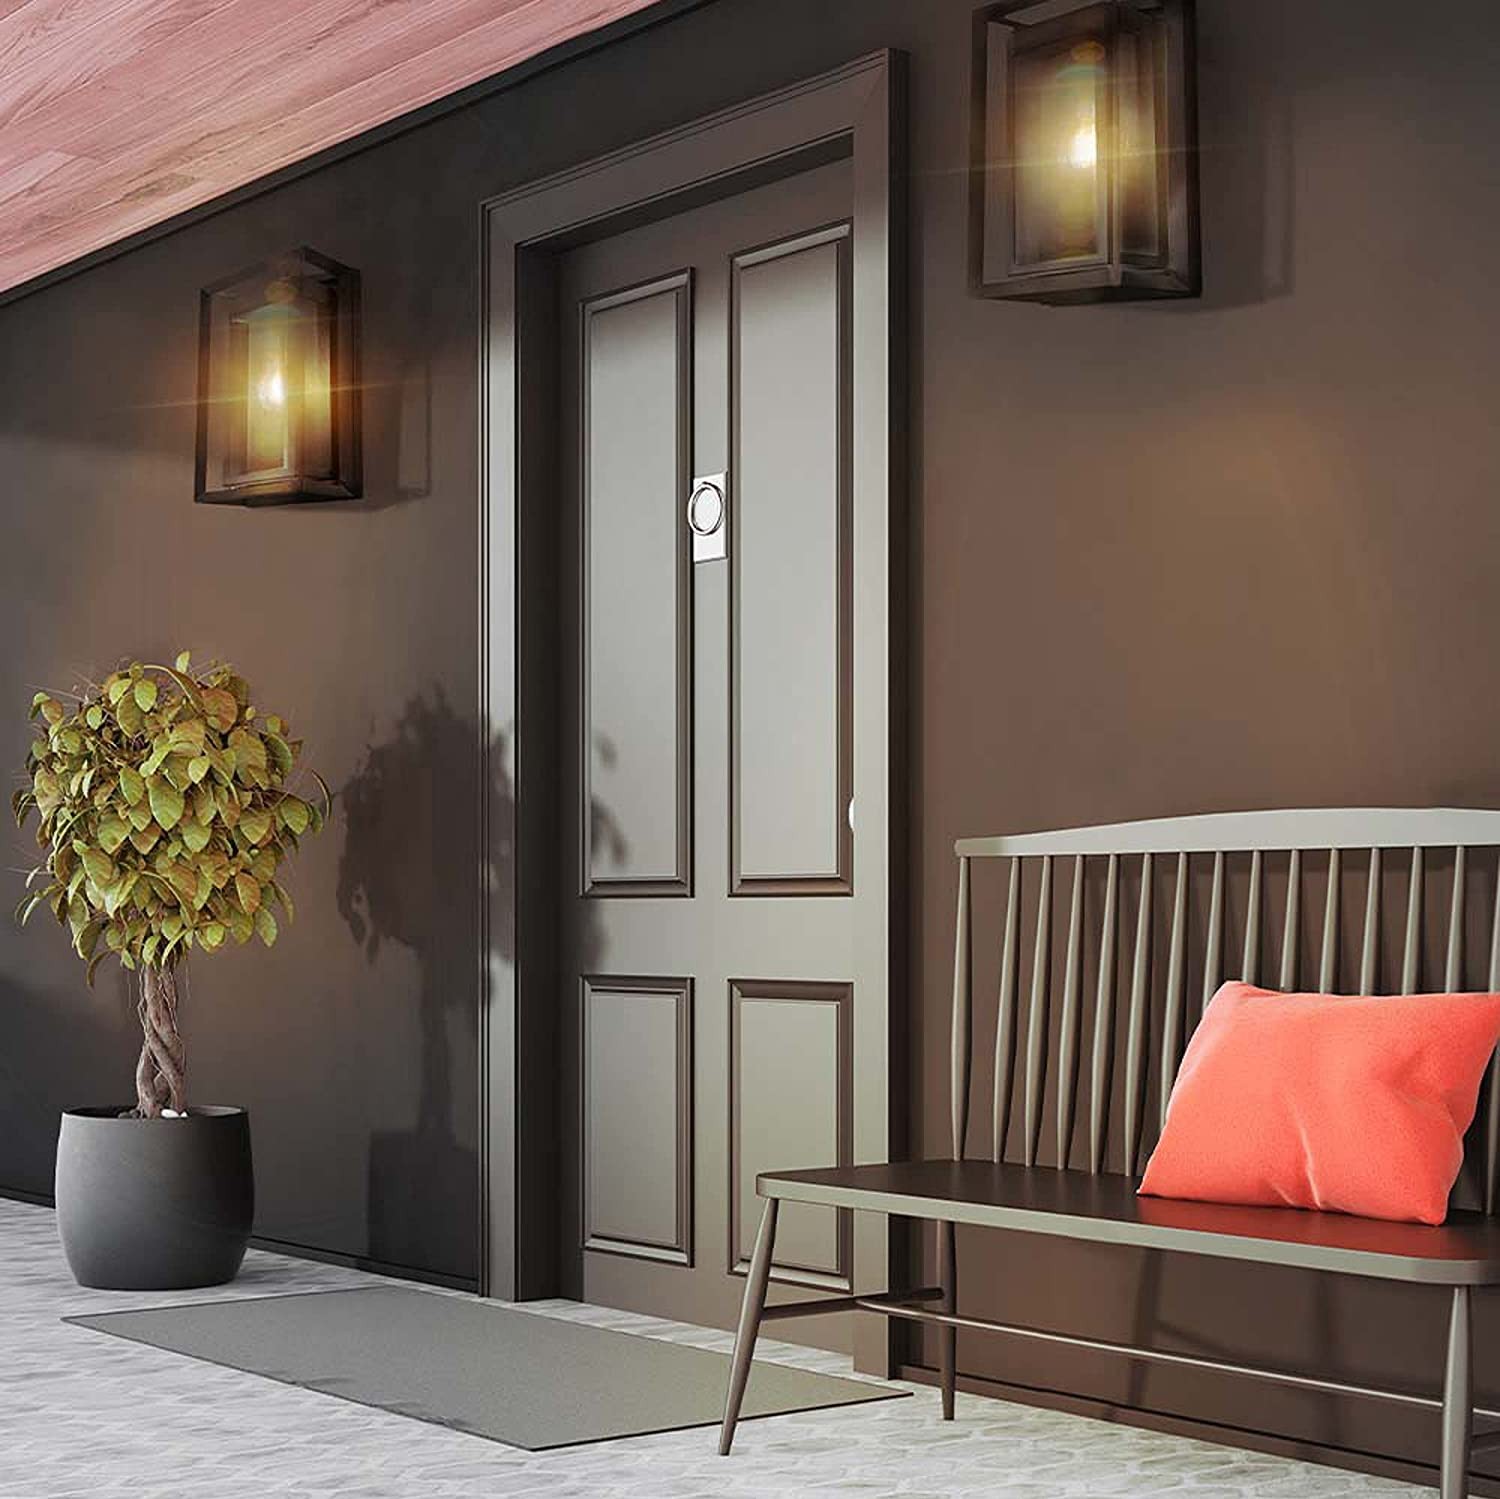 68,95 € Free Shipping | Outdoor wall light 30×18 cm. Crystal and metal casting. Black Color